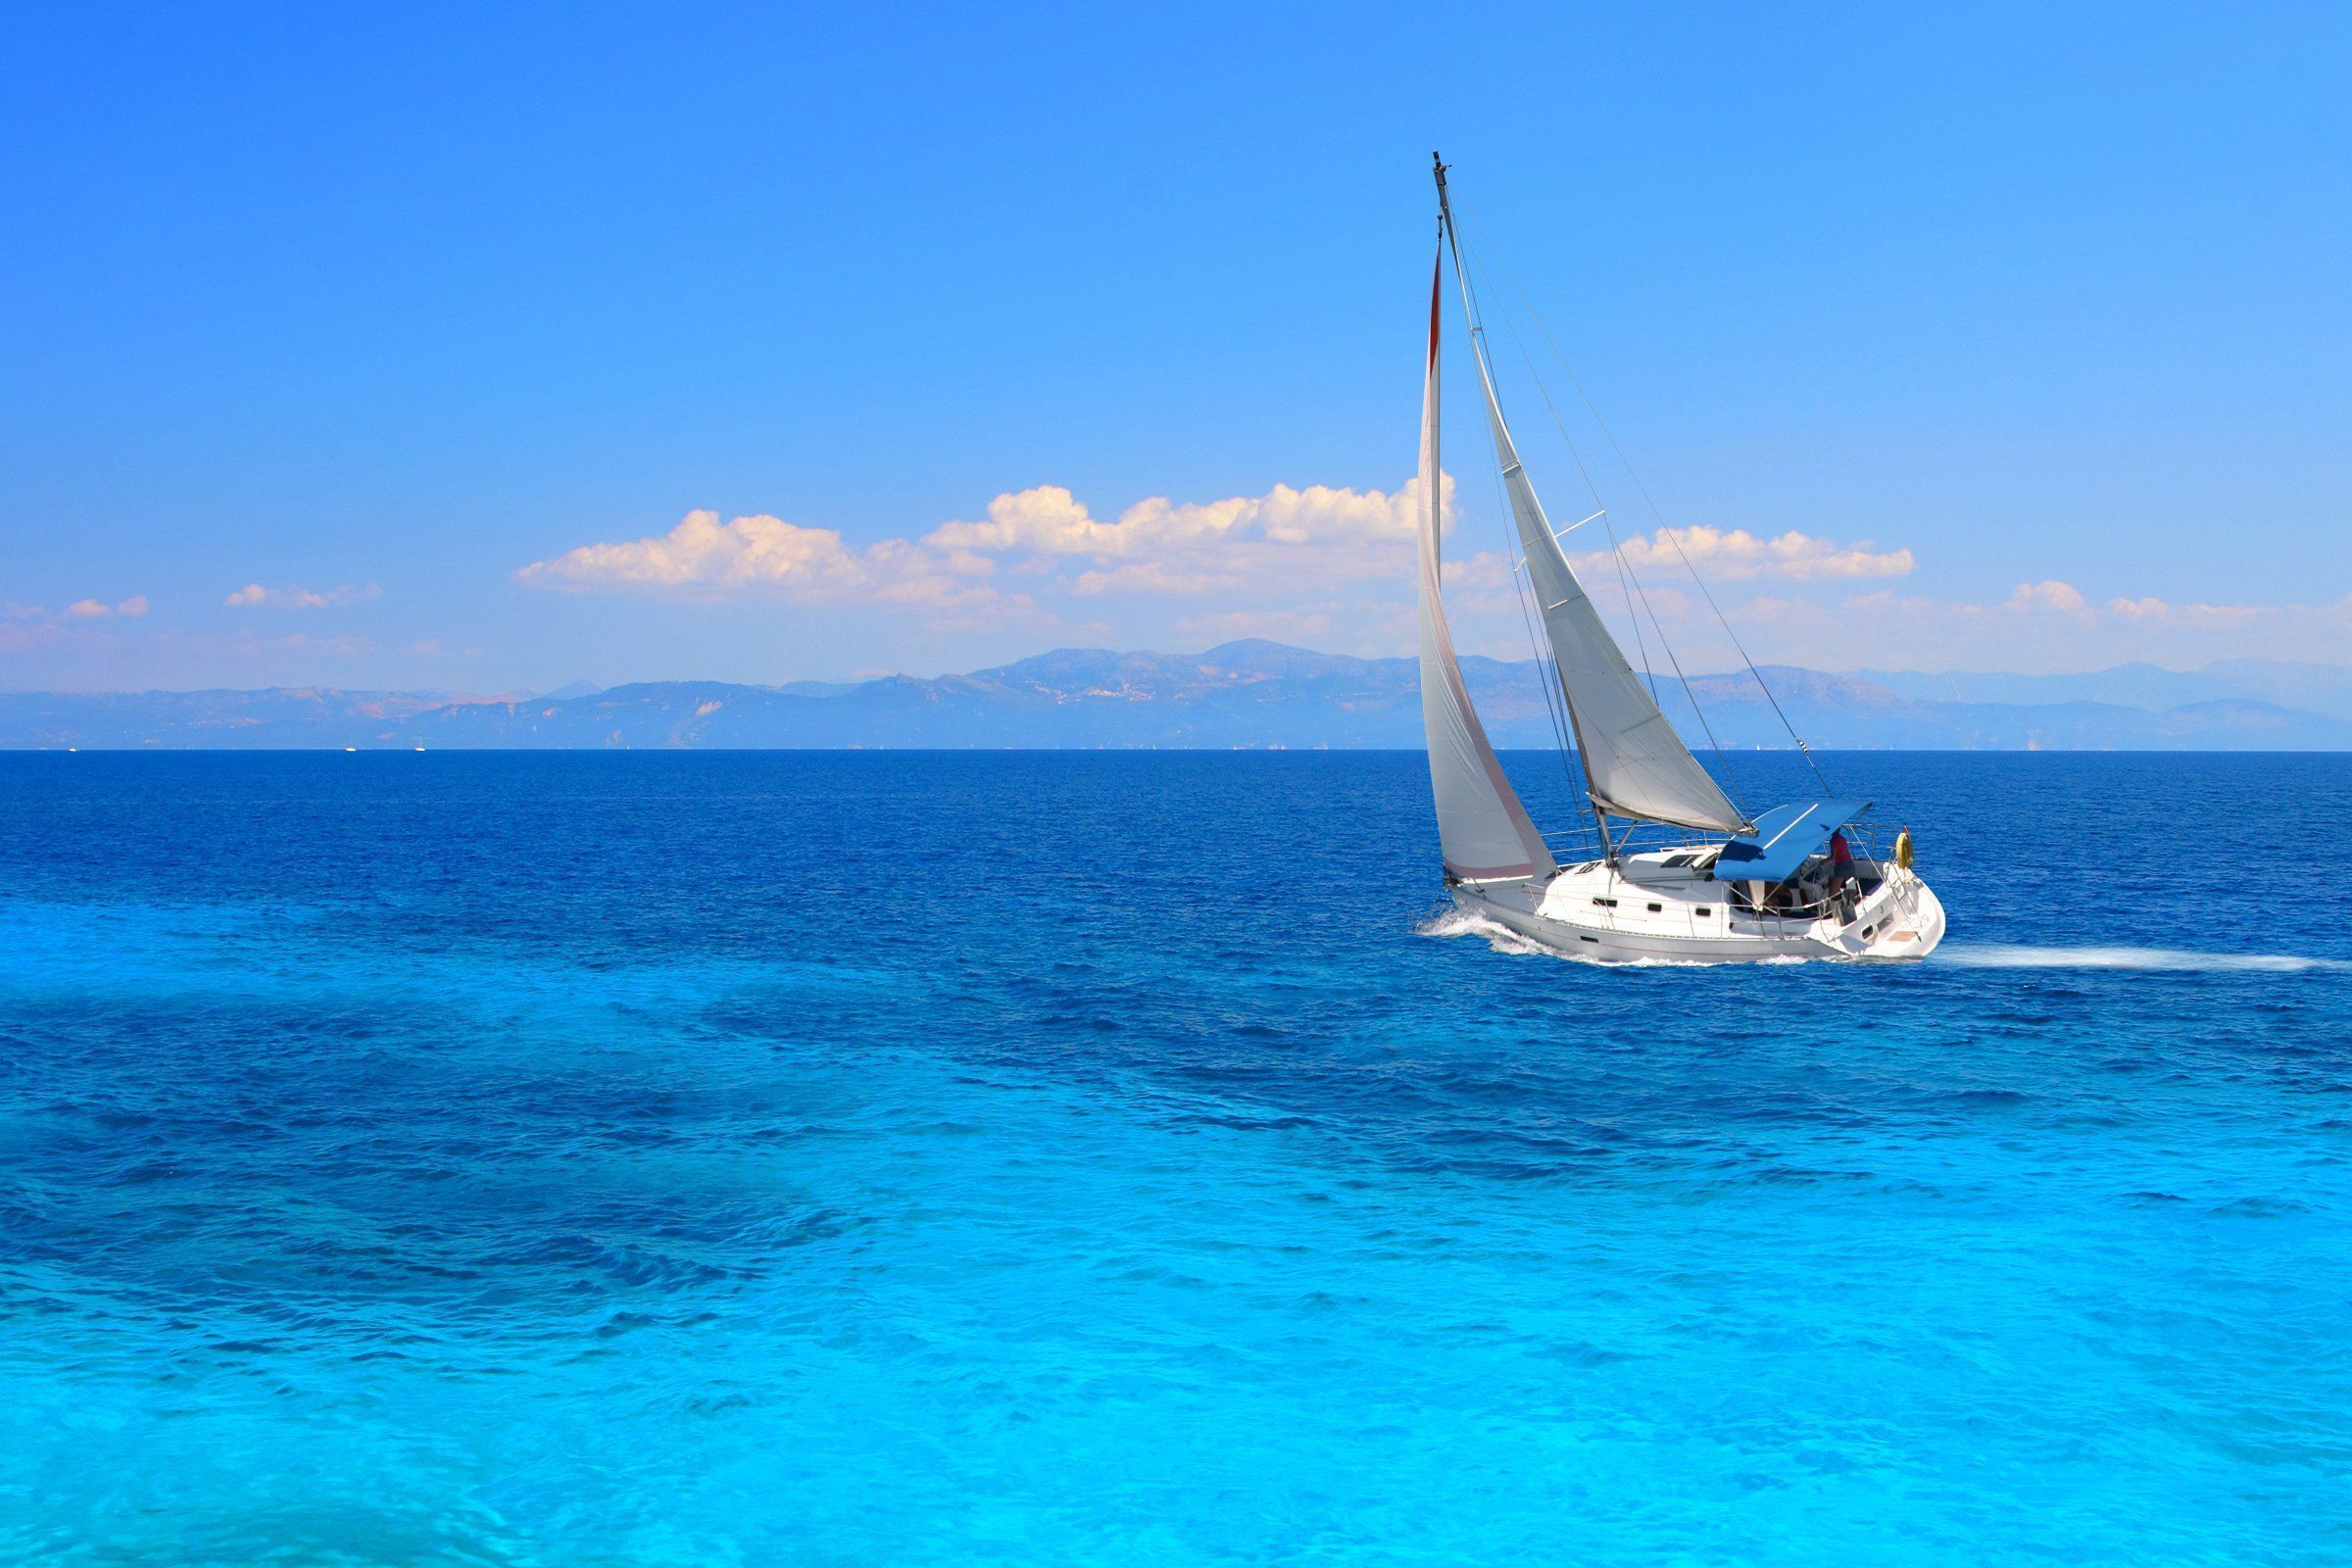 Ocean the wind the sails the way yacht wallpaper | 2400x1600 ...